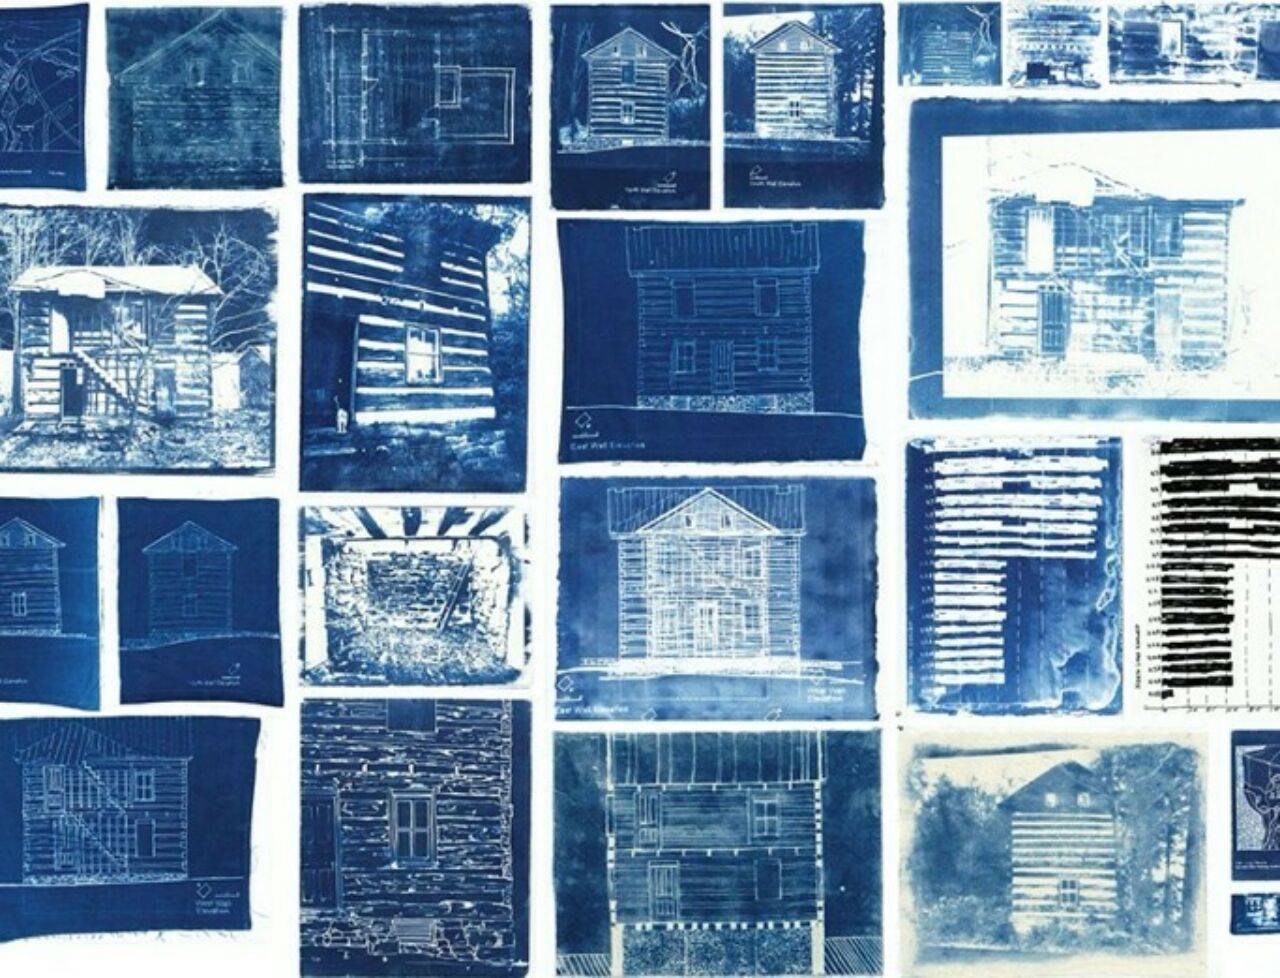 Collection of 20 blue-colored log cabin drawings and photos; part of a student thesis study.